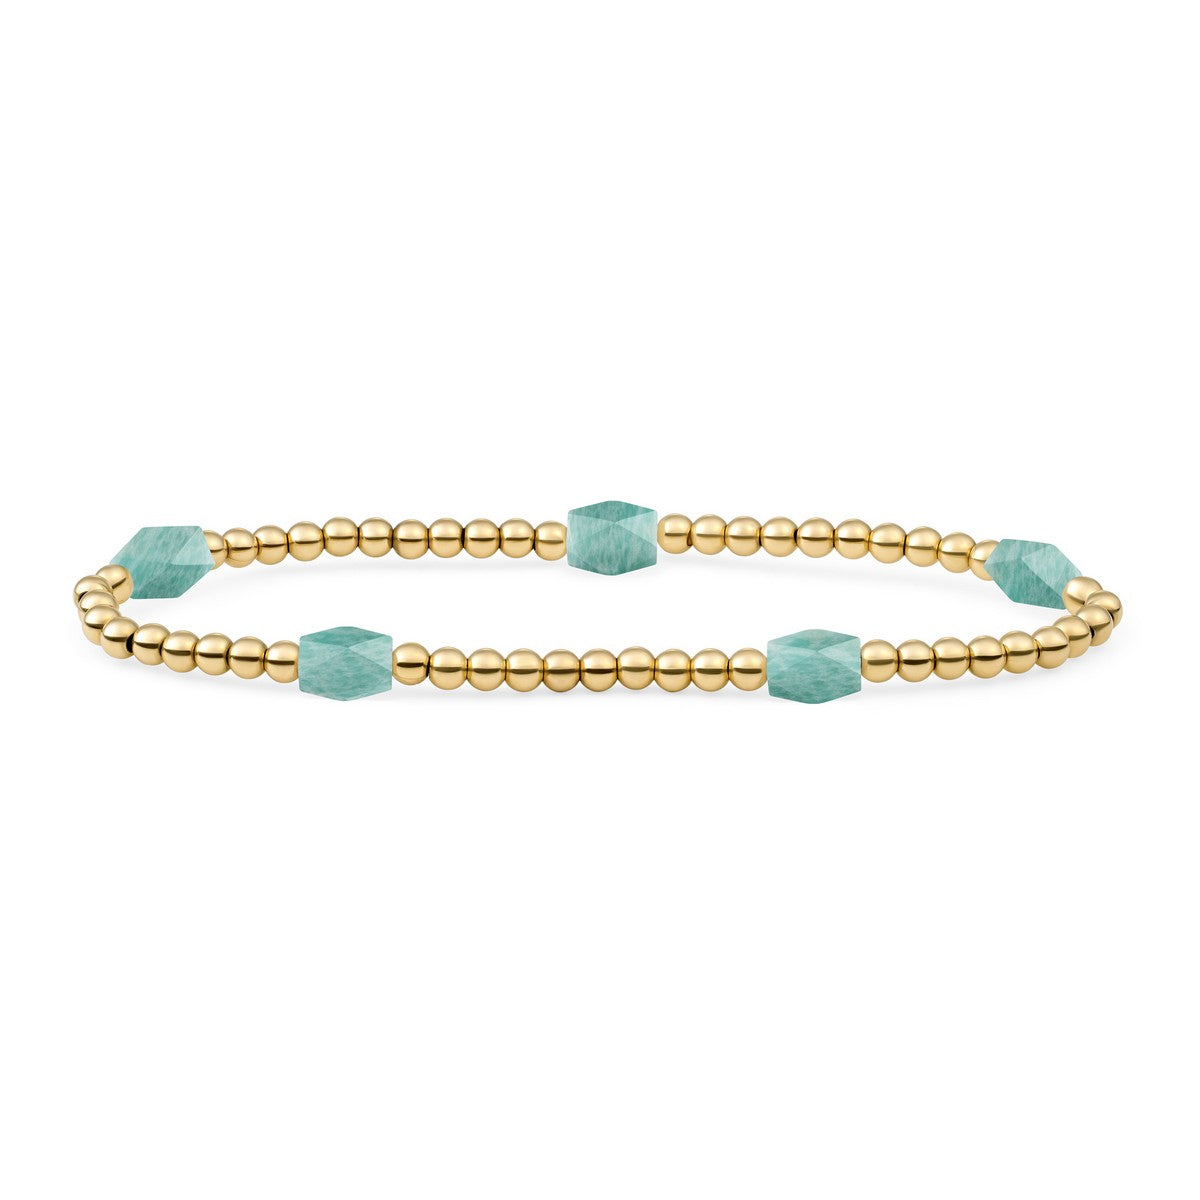 Sparkling Jewels Armband | Rich Green Amazonite 3mm Reverse Edge Mix | gold plated SB-G-3MM-BAR-G57